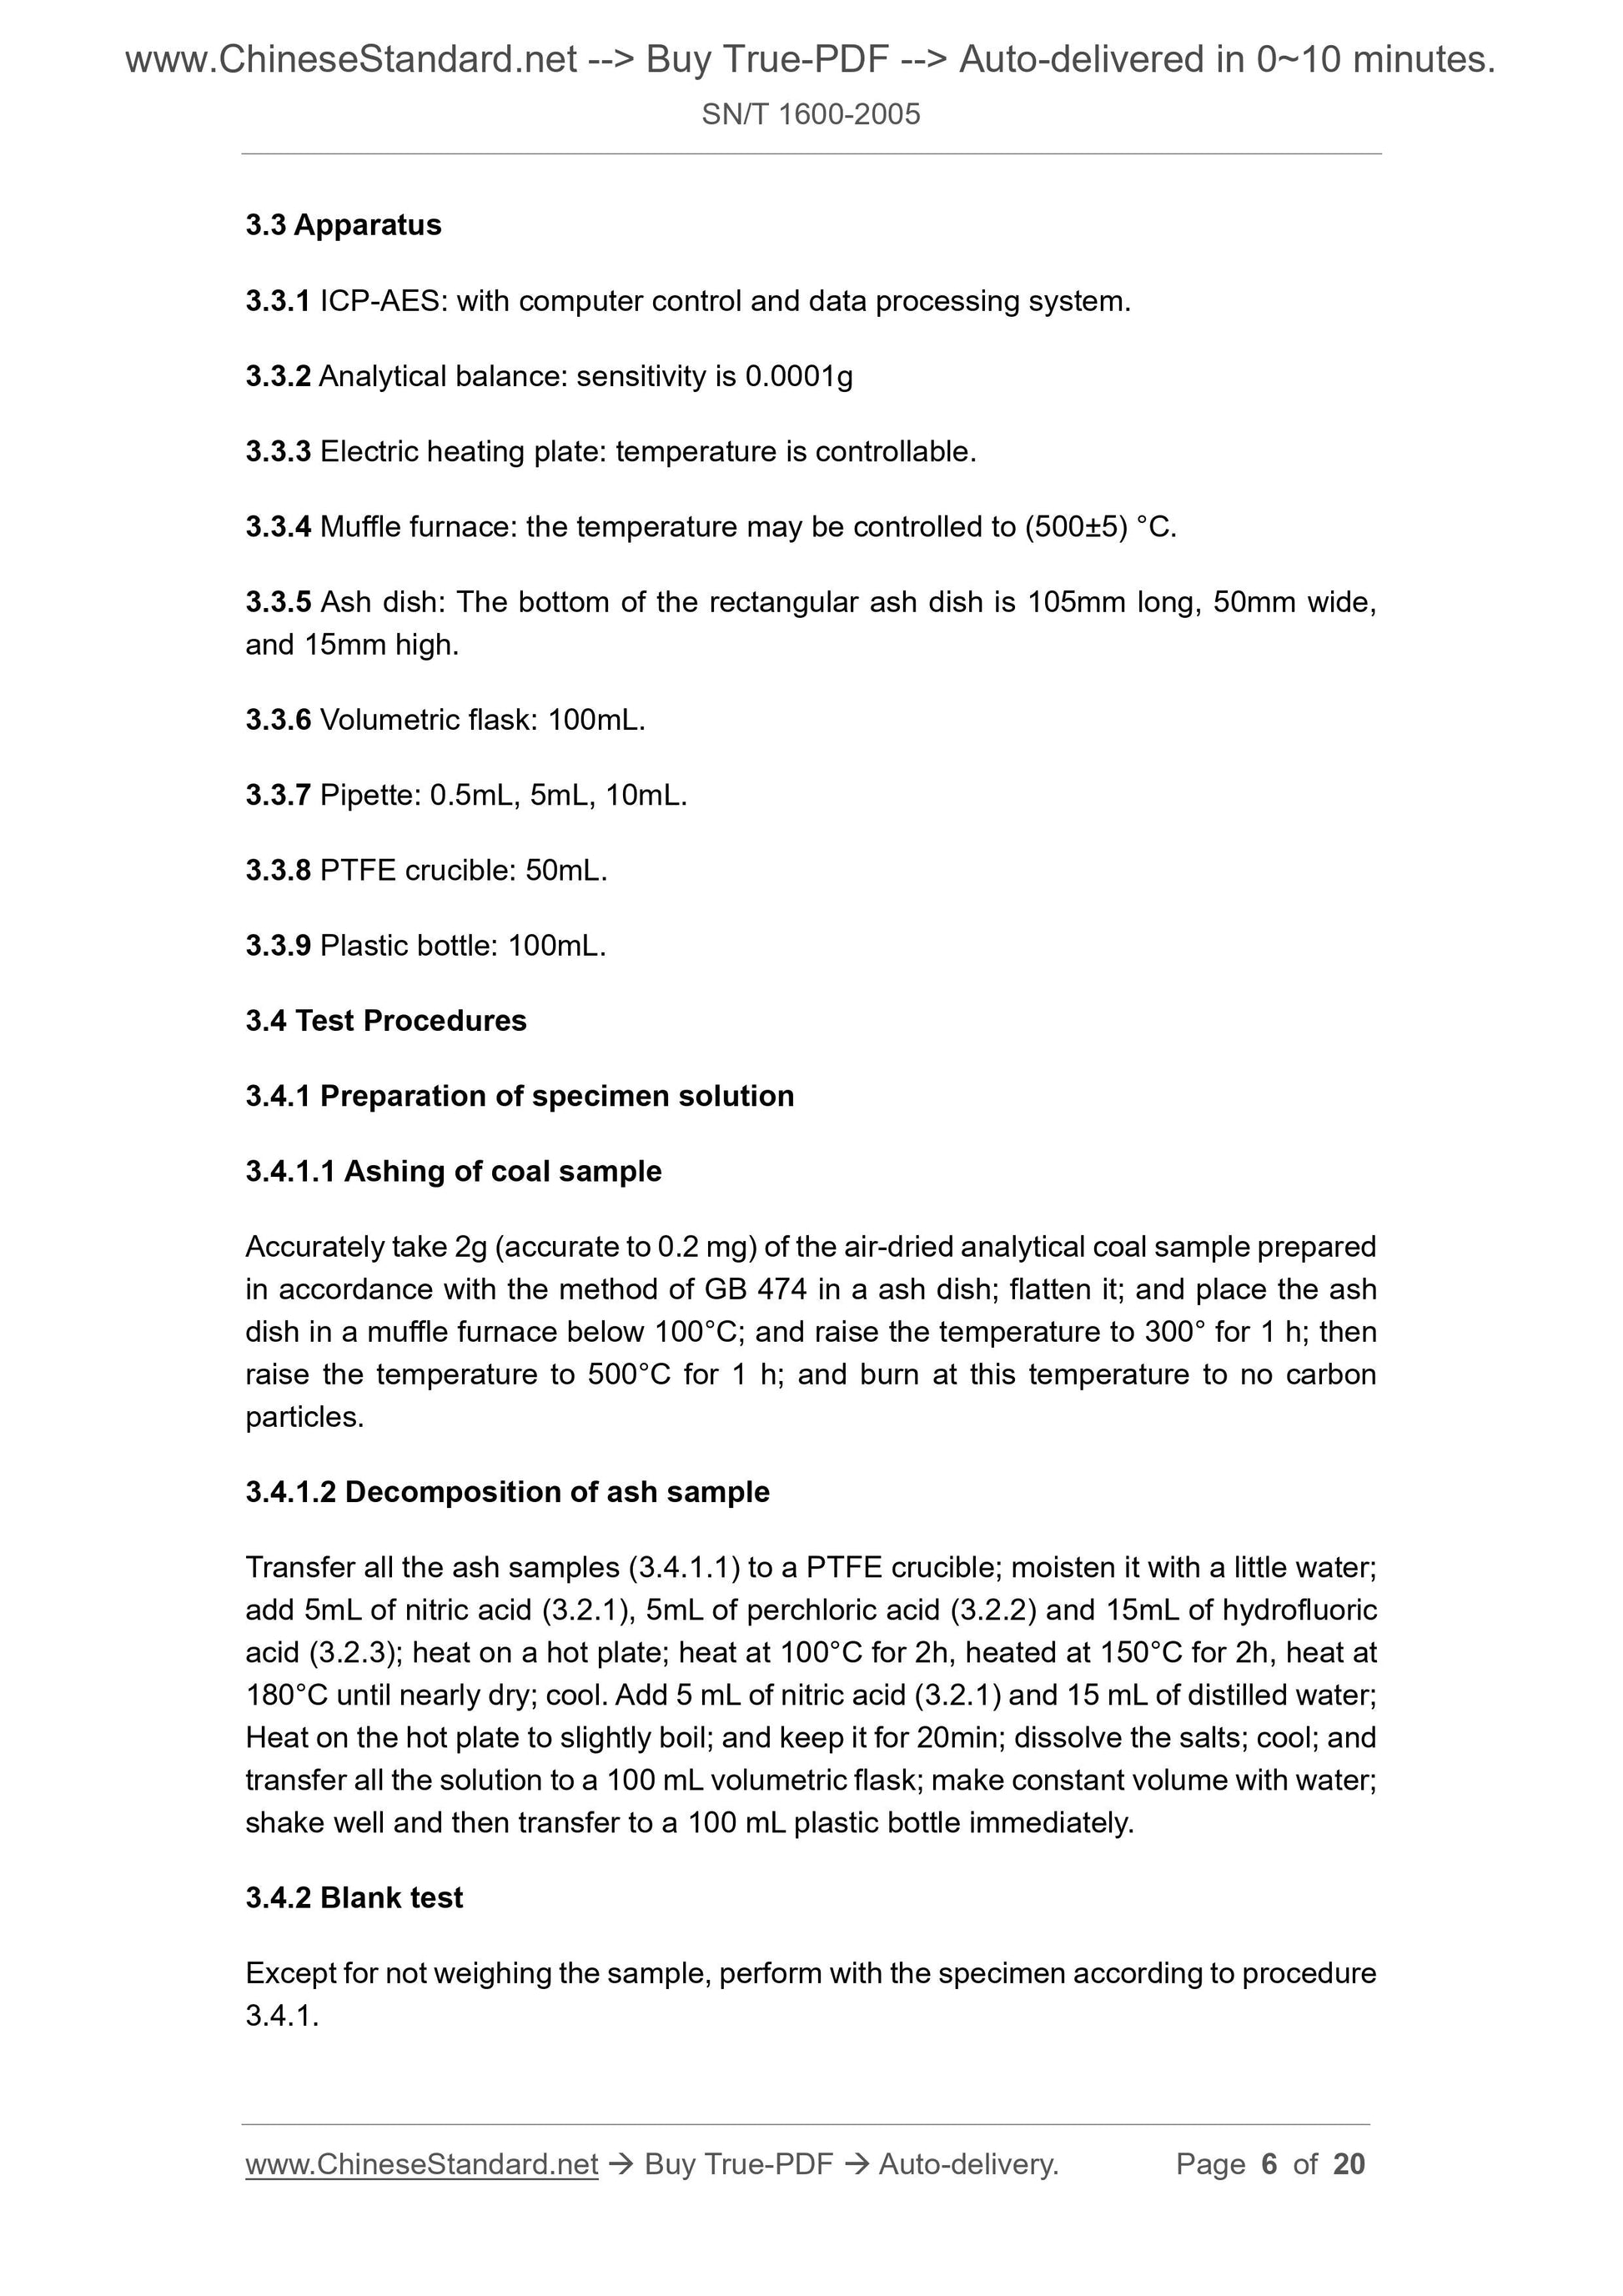 SN/T 1600-2005 Page 4